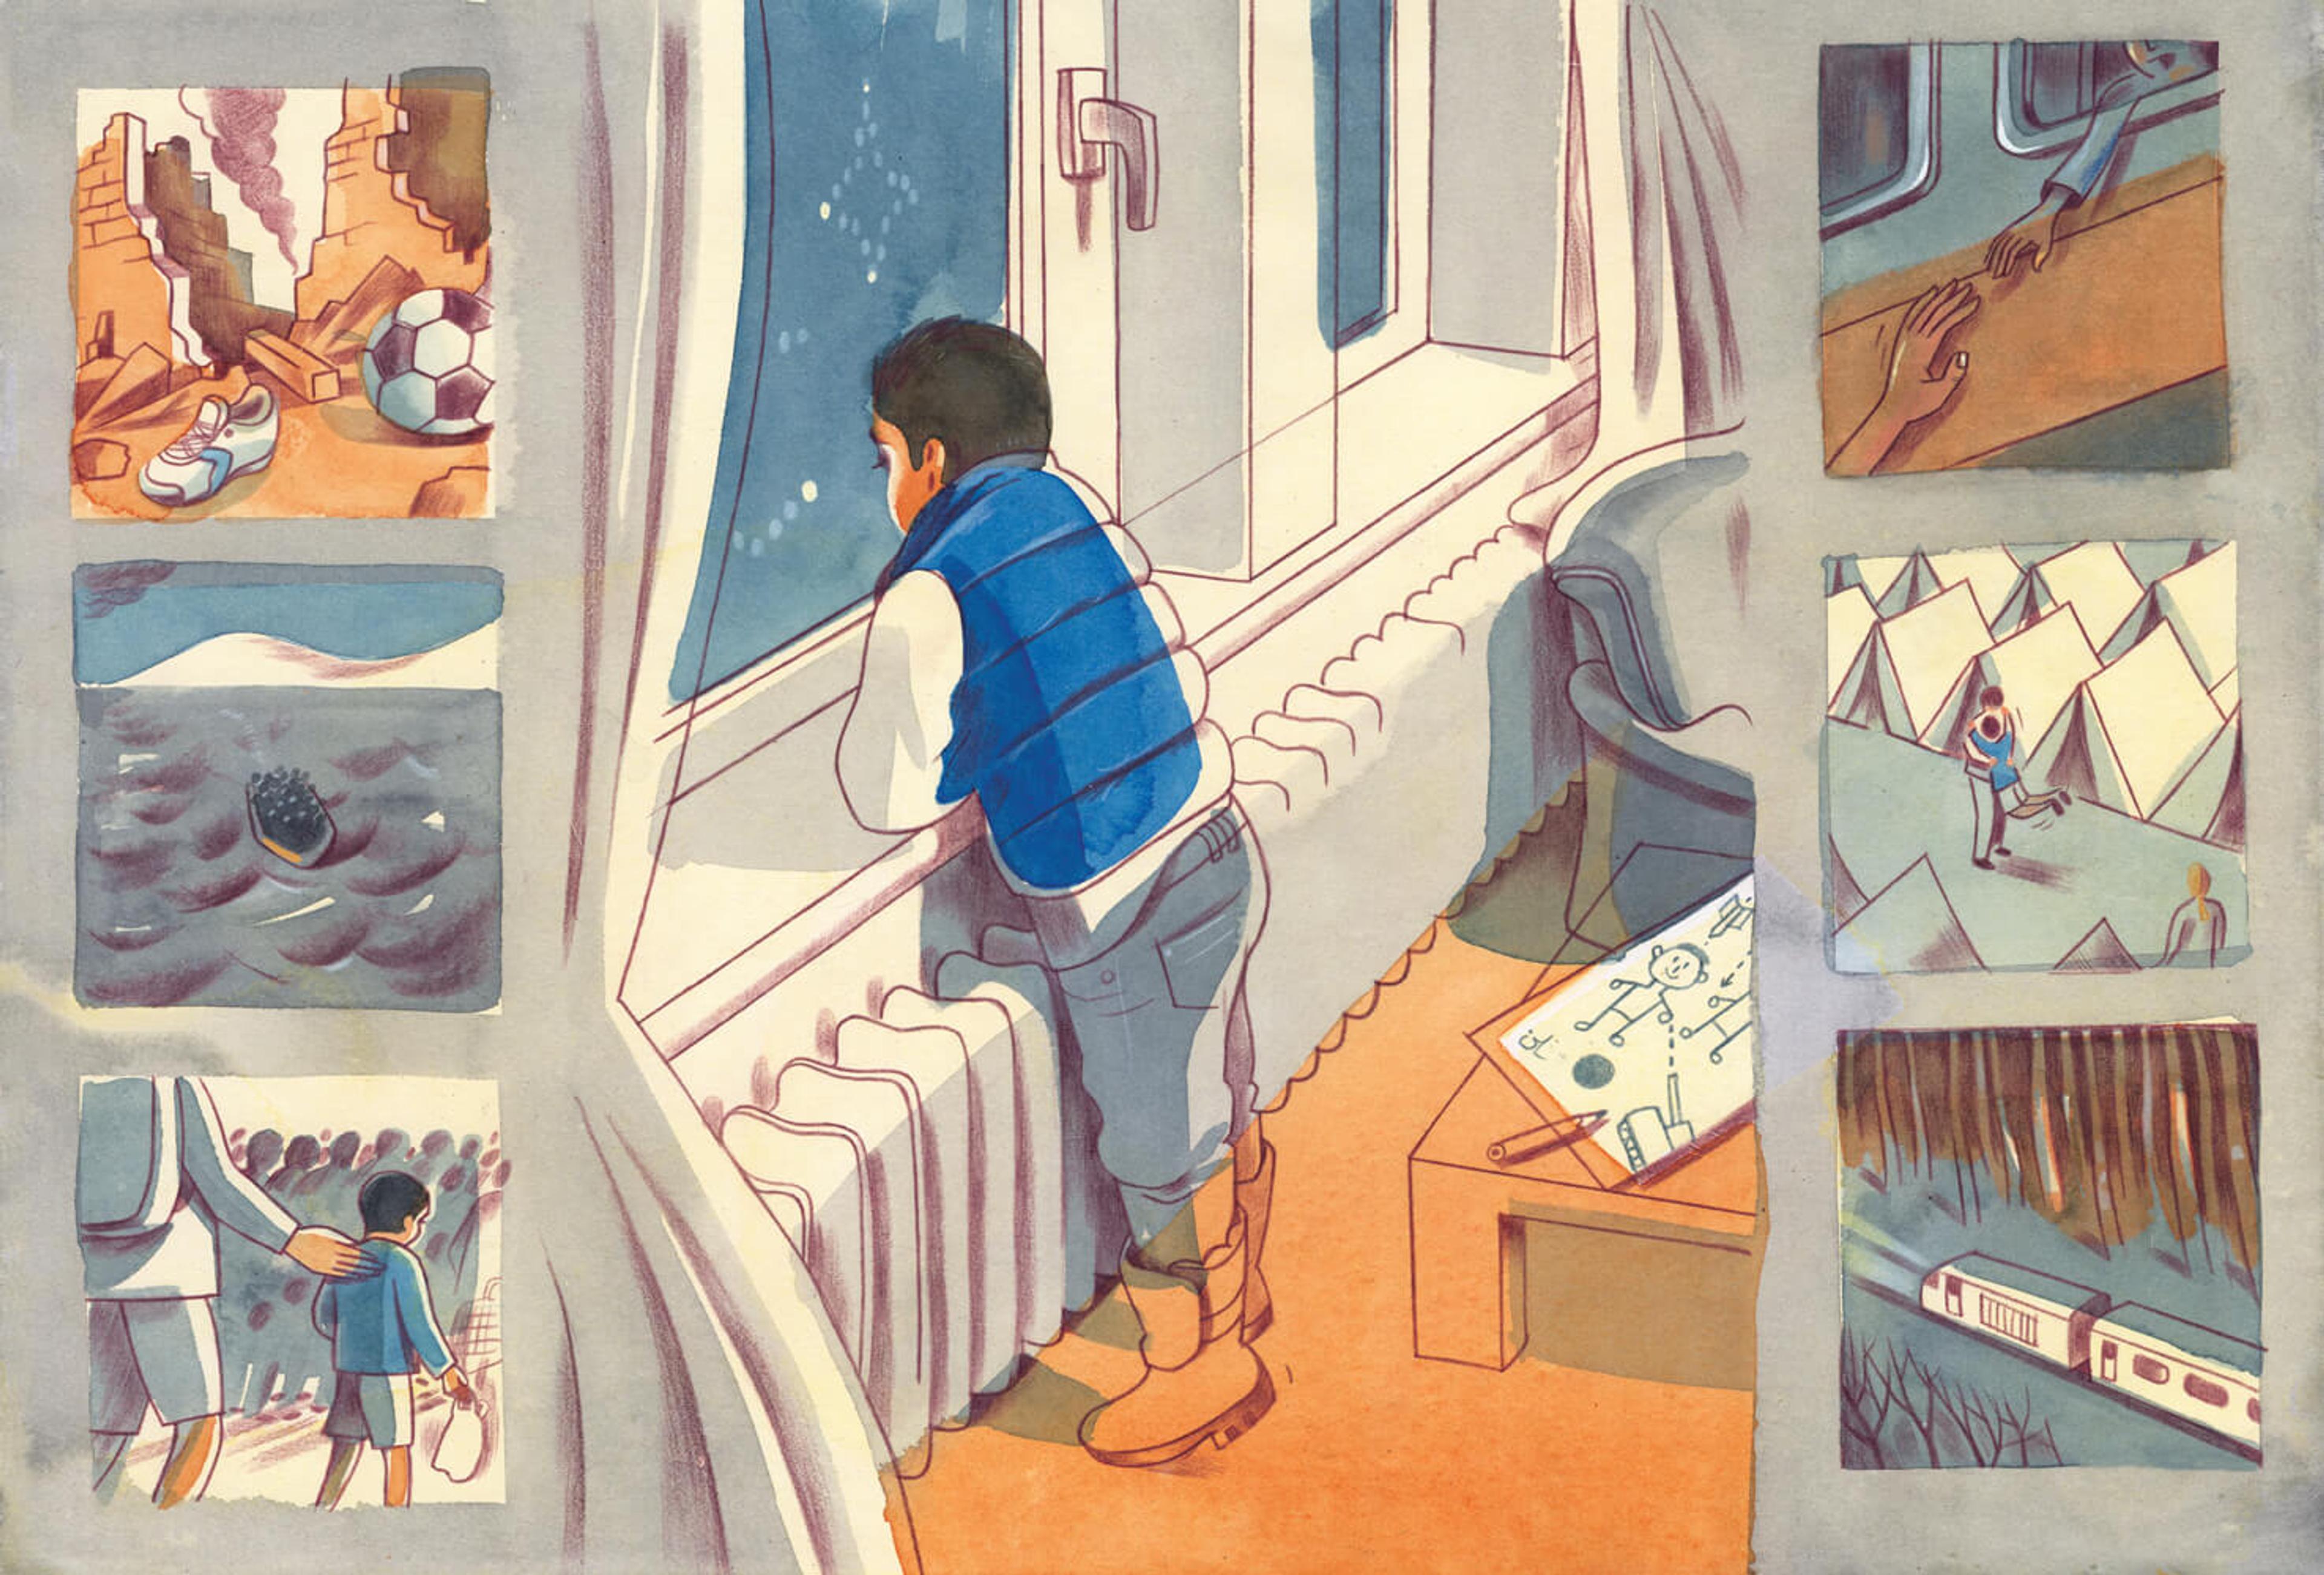 Illustration of child looking out of a window surrounded by scenes of rubble, a boat, a hand reaching out from a train, a row of tents and a train travelling through the night